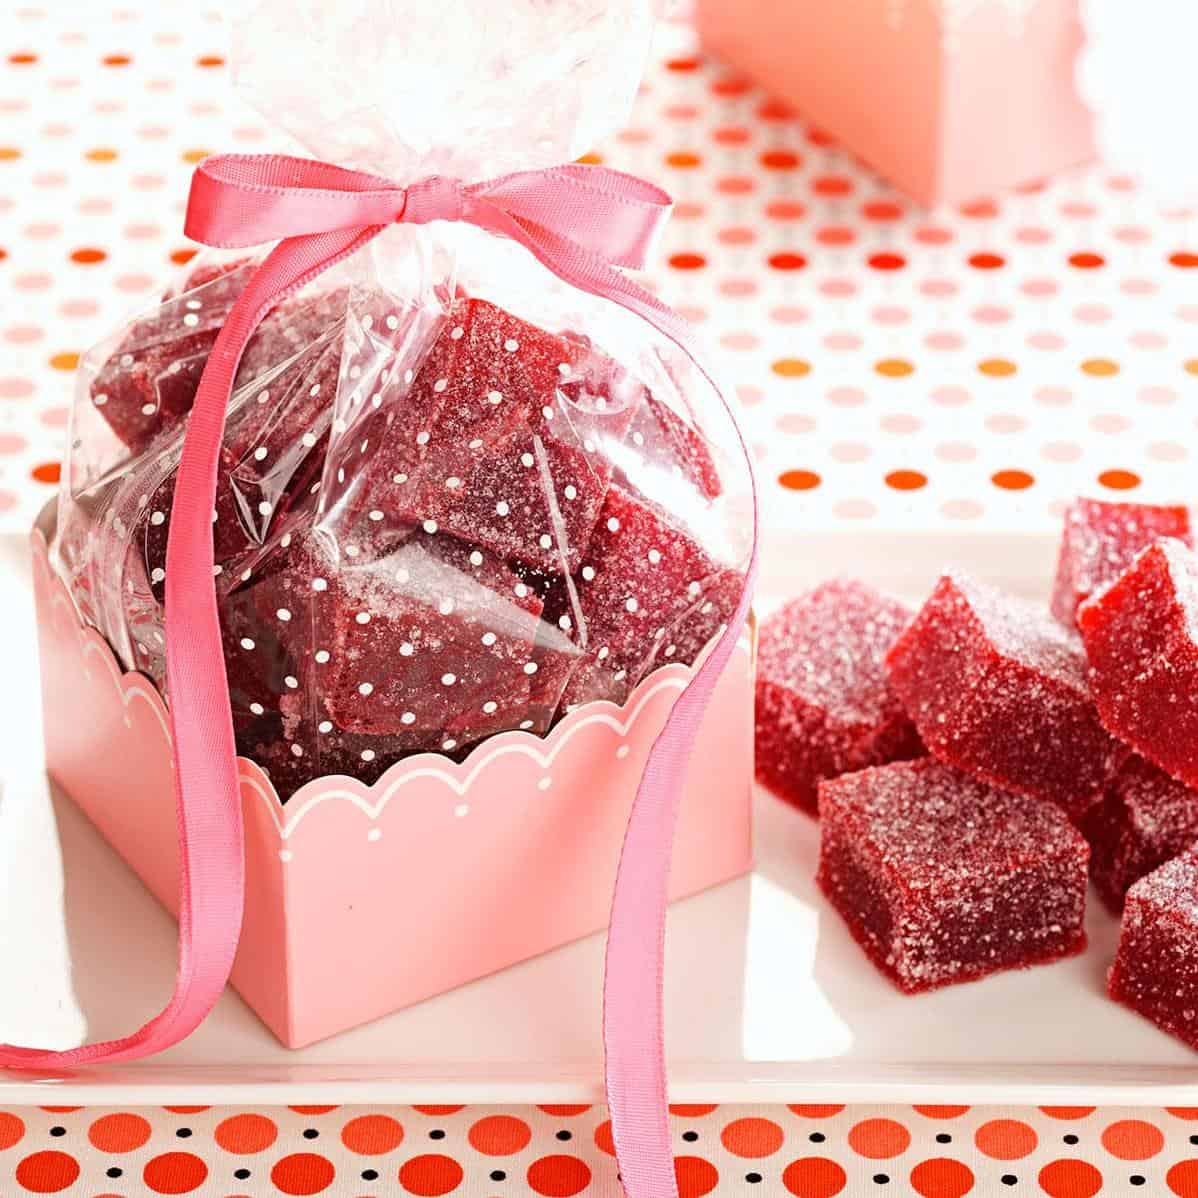  A simple recipe for a delicious candy!